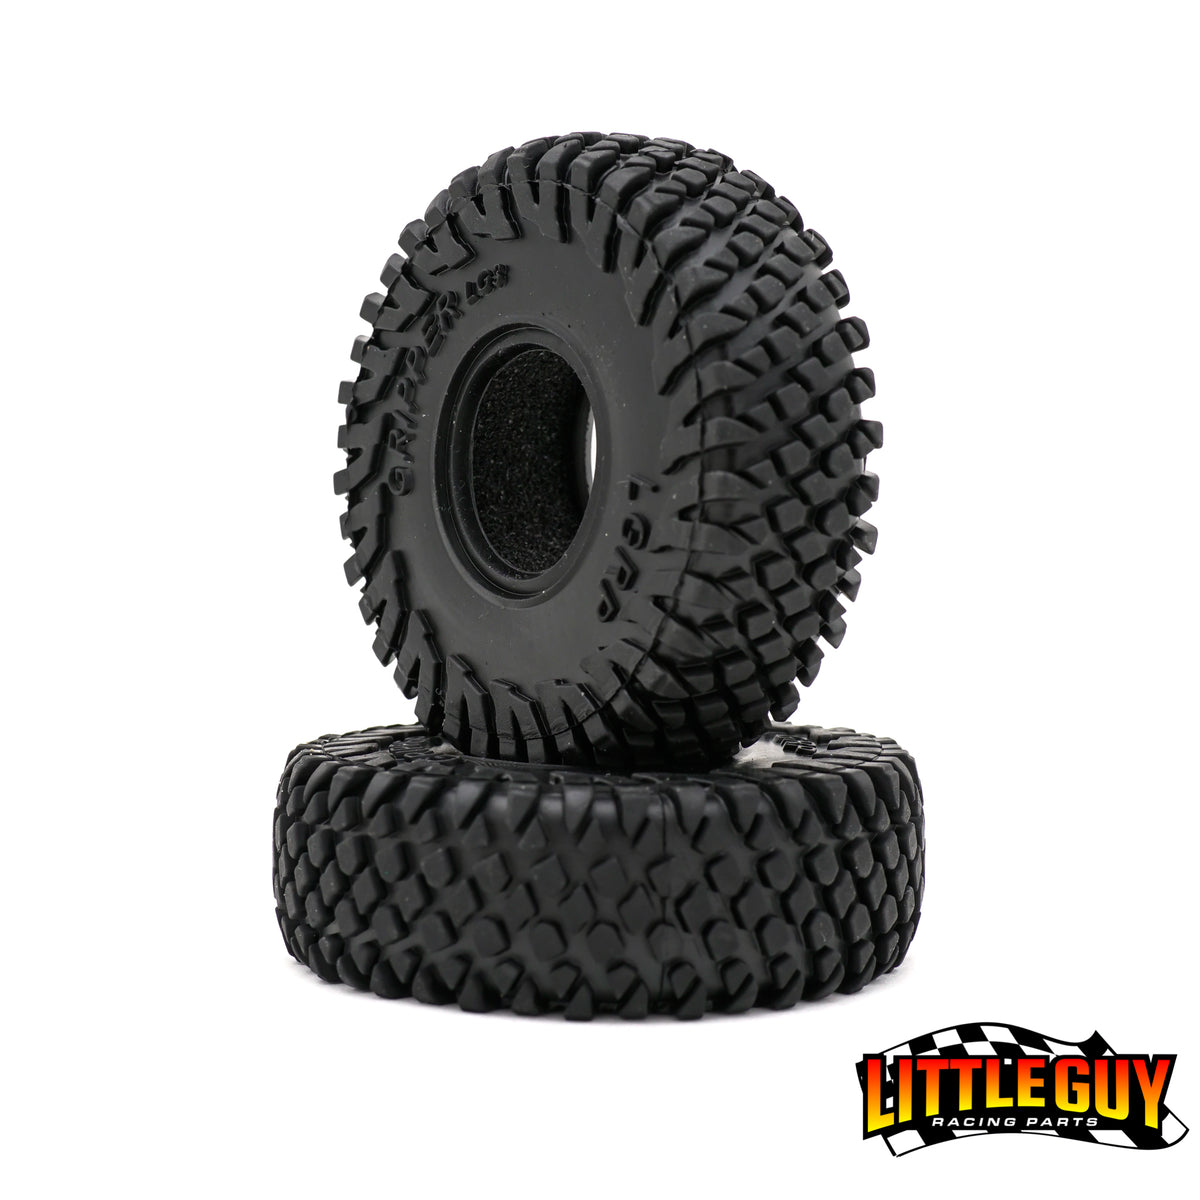 1.0 TIRE FOAM REPLACEMENT – Little Guy Racing Parts